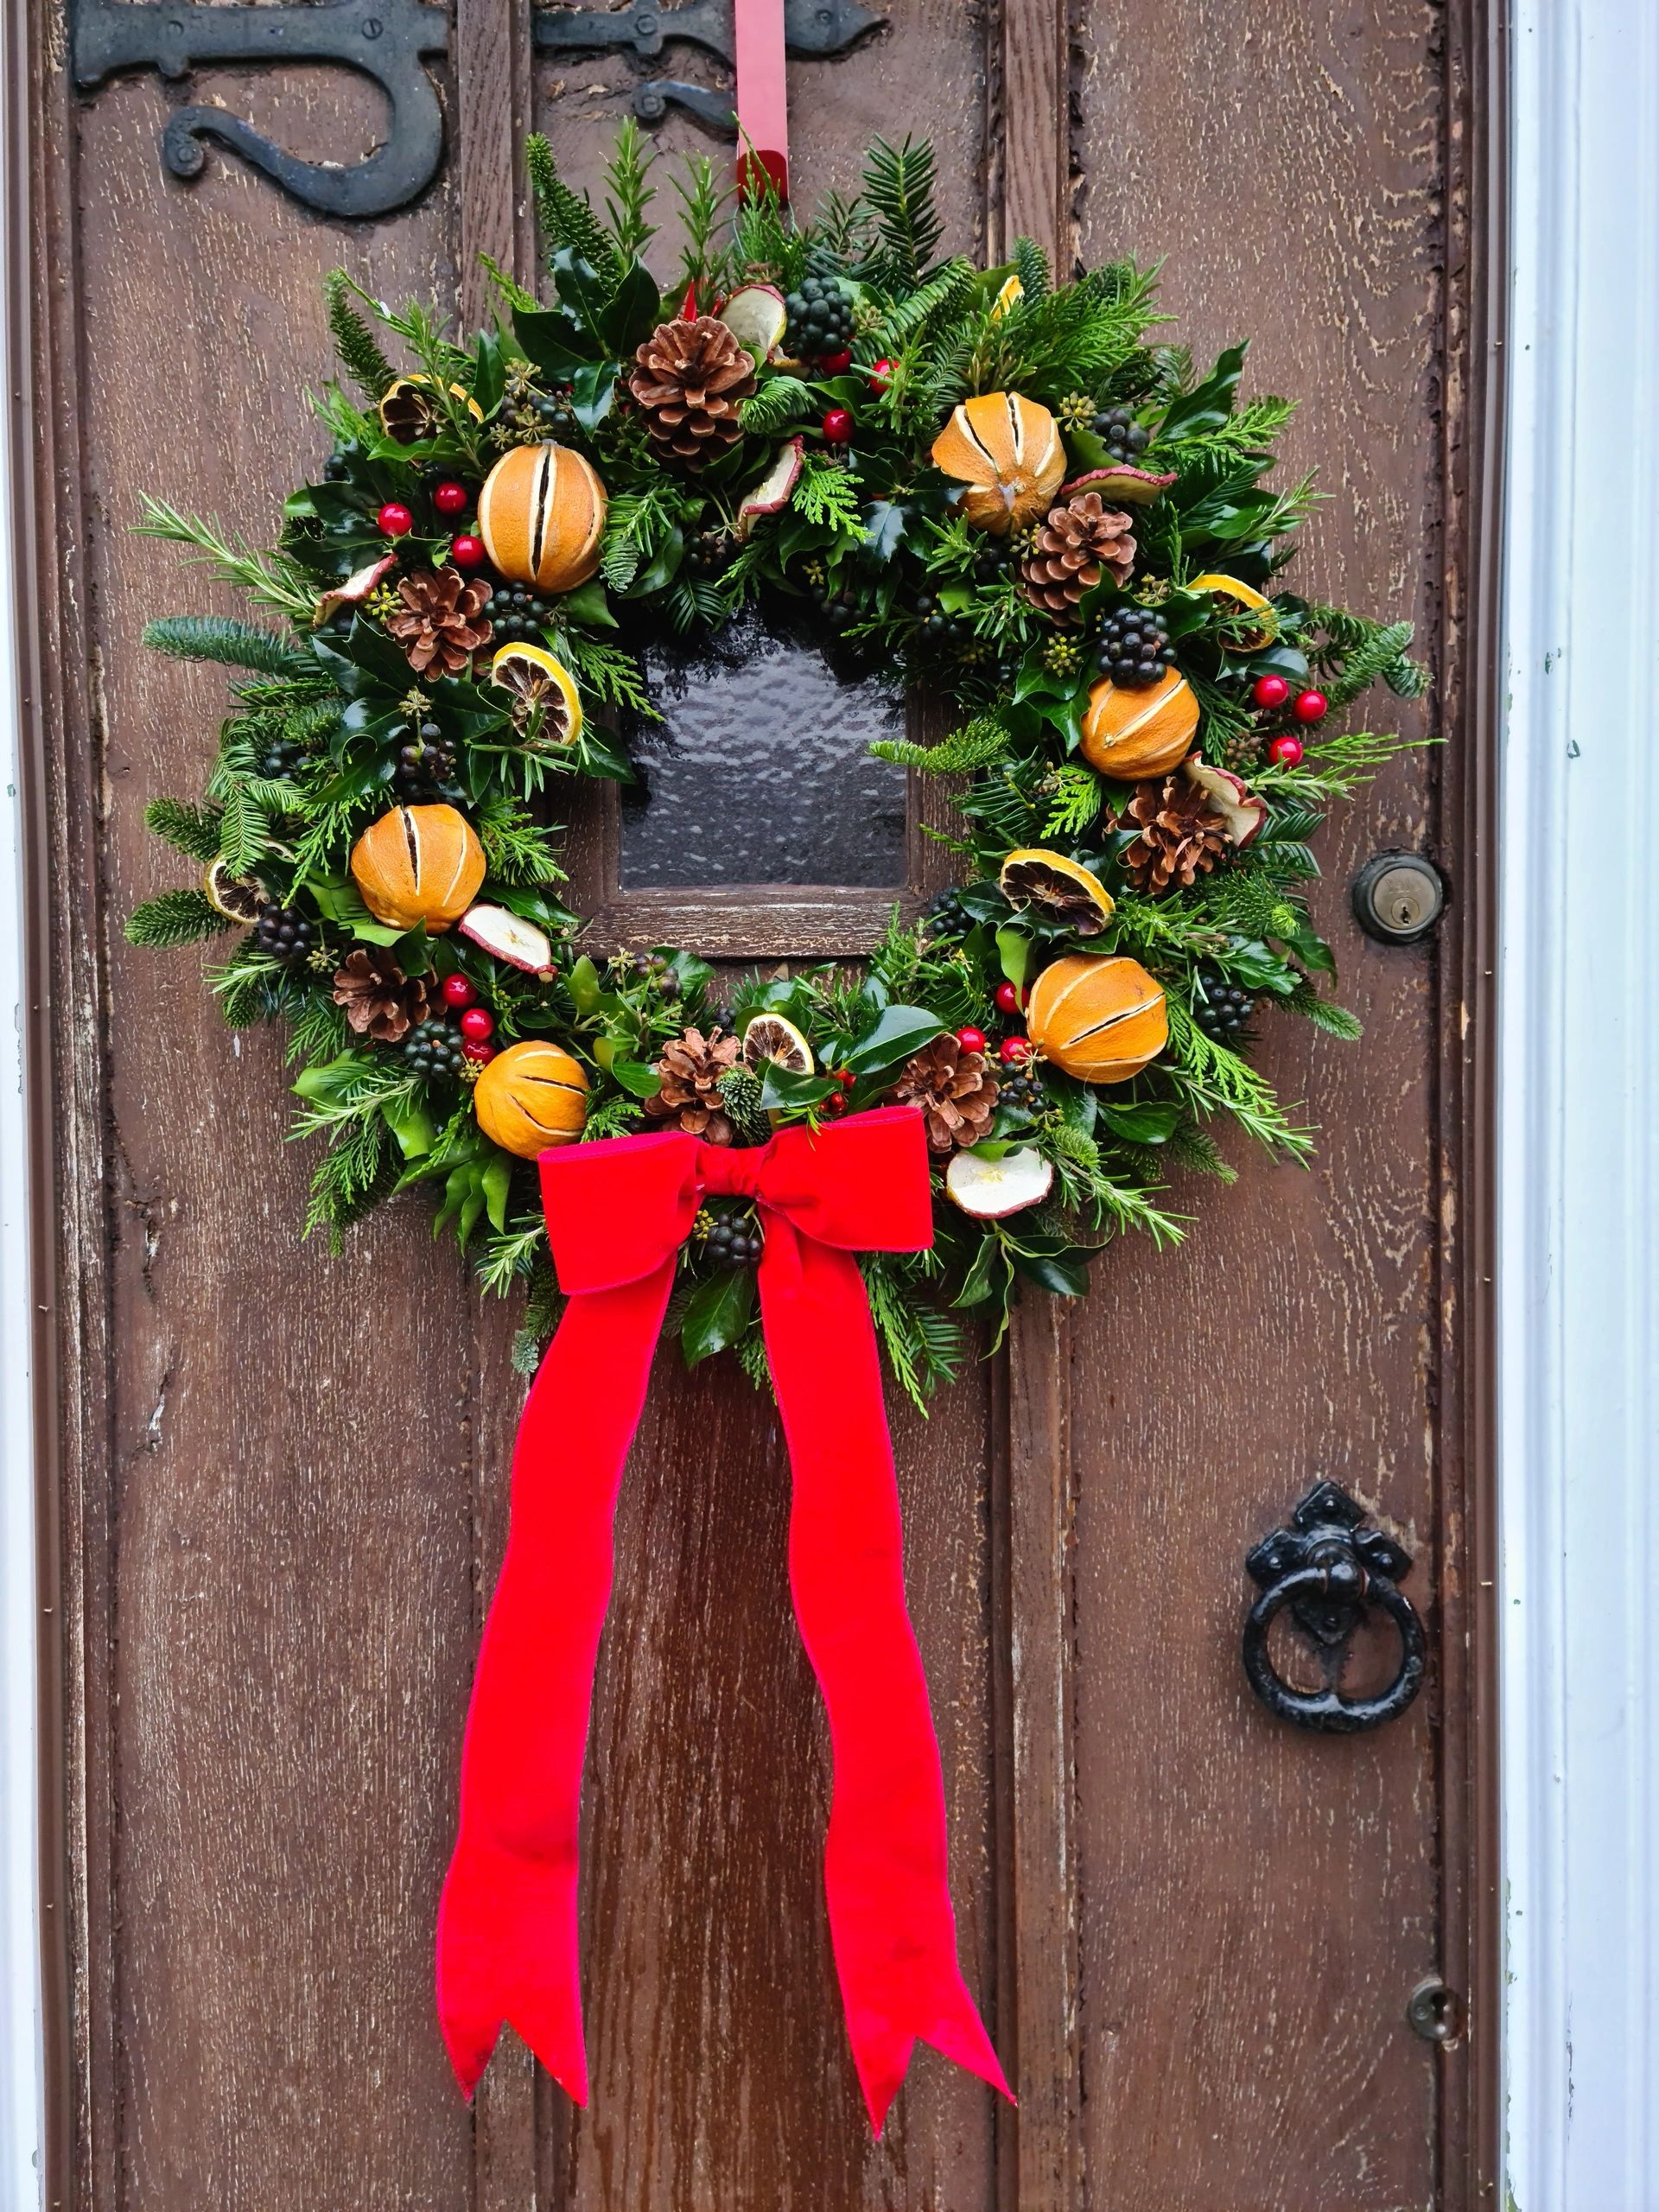 Luxury Christmas Wreath complete with pinecones and whole oranges, fruit slices and berries